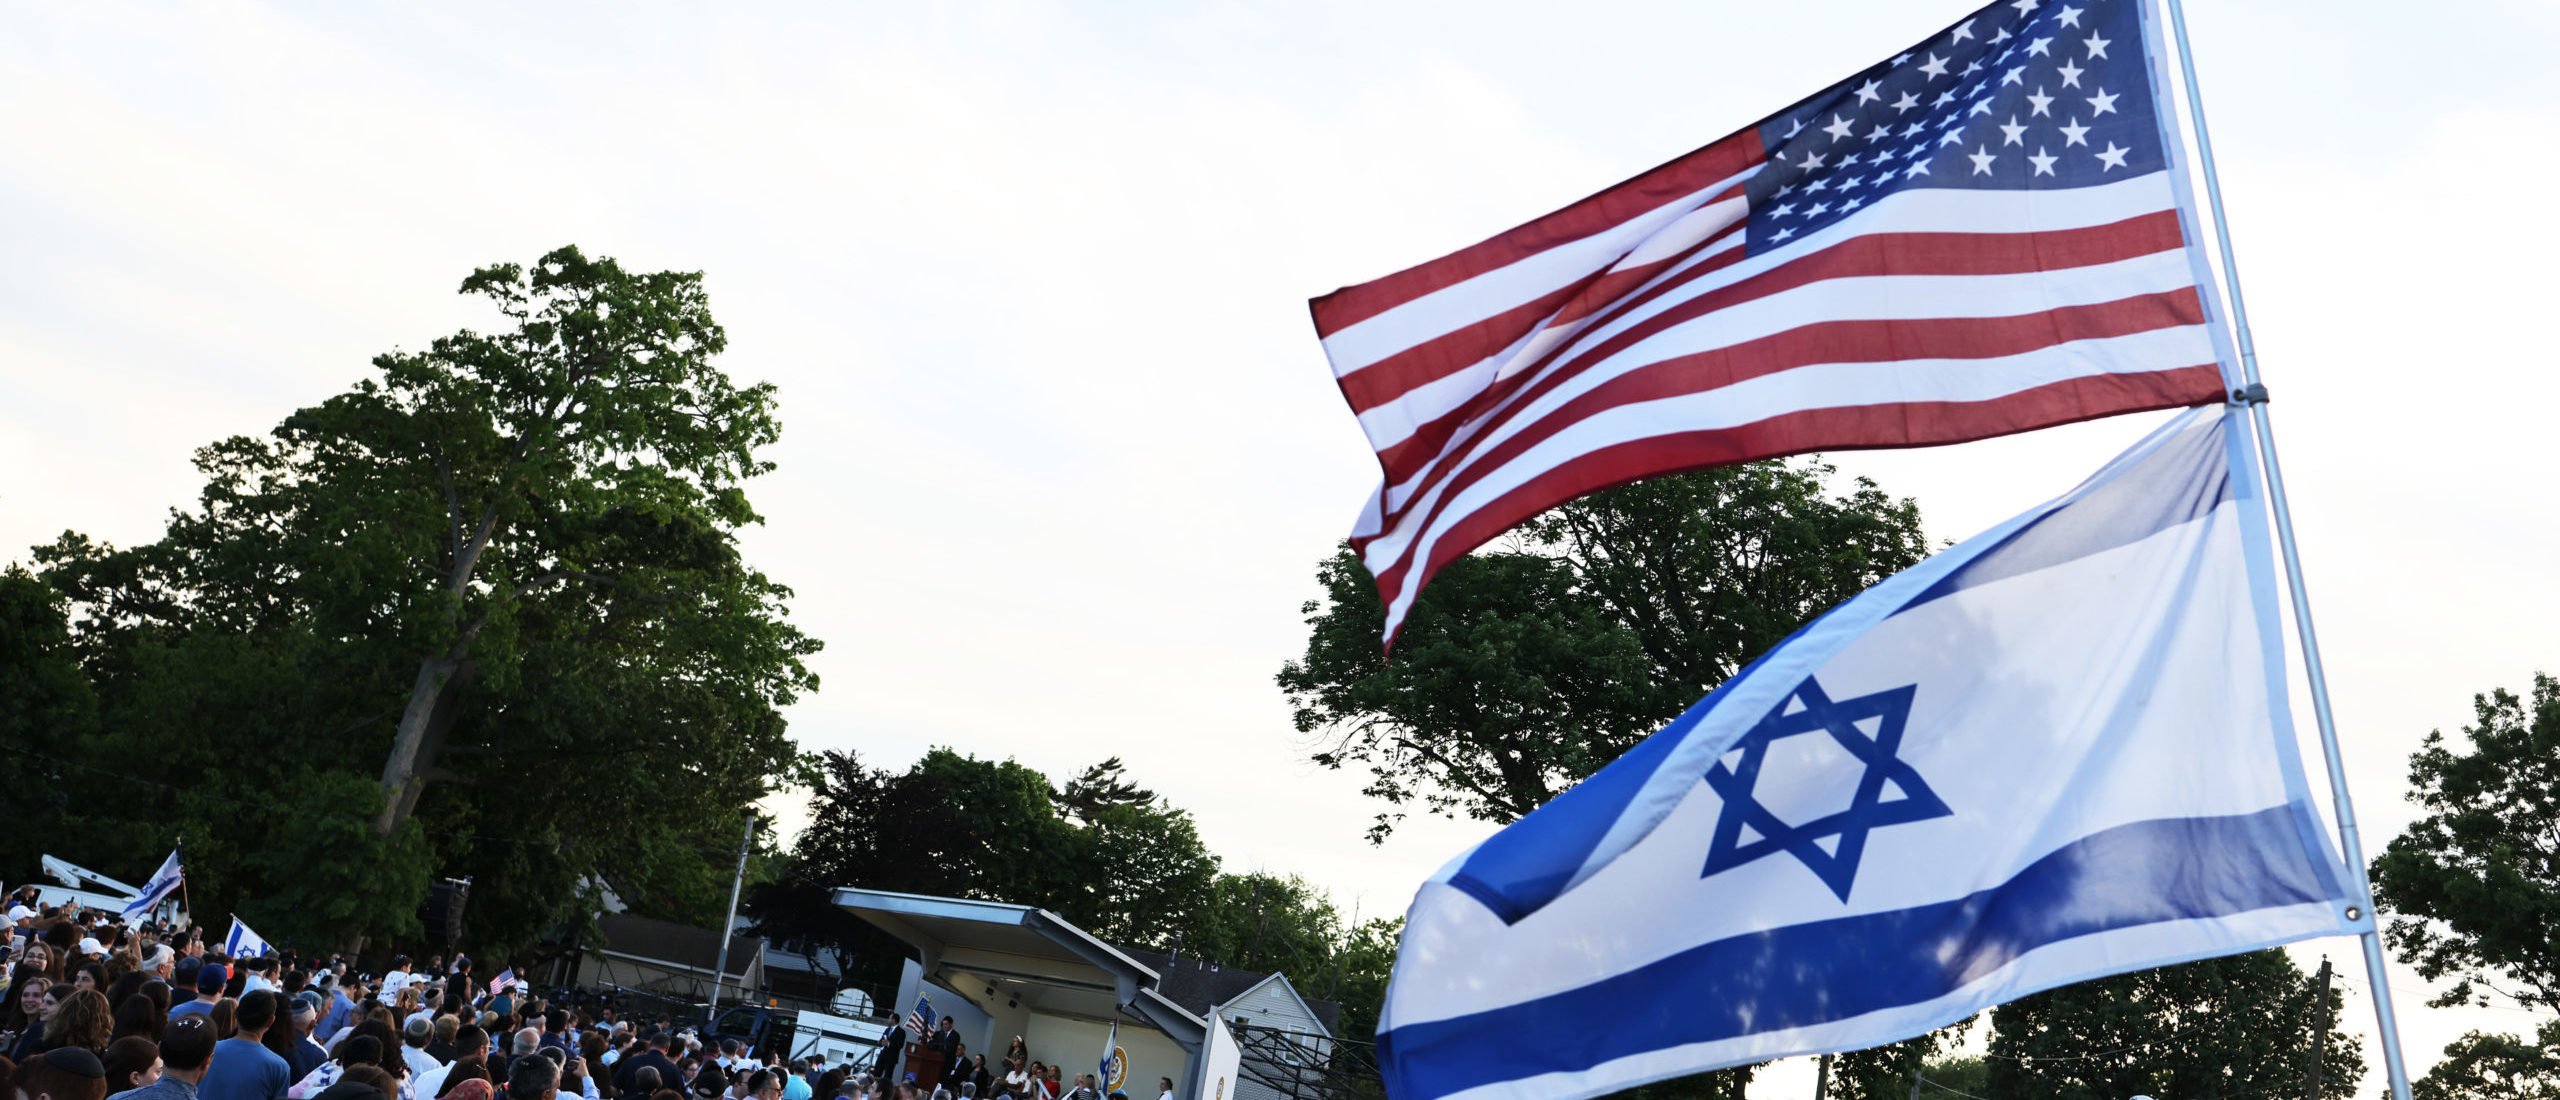 People attend a rally denouncing anti-Semitic violence on May 27, 2021 in Cedarhurst, New York. A rally was held by various organizations and local Jewish community groups to support Joseph Borgen, a recent victim of a hate crime, after a rise of violent anti-Semitic attacks in New York and across the U.S. (Photo by Michael M. Santiago/Getty Images)